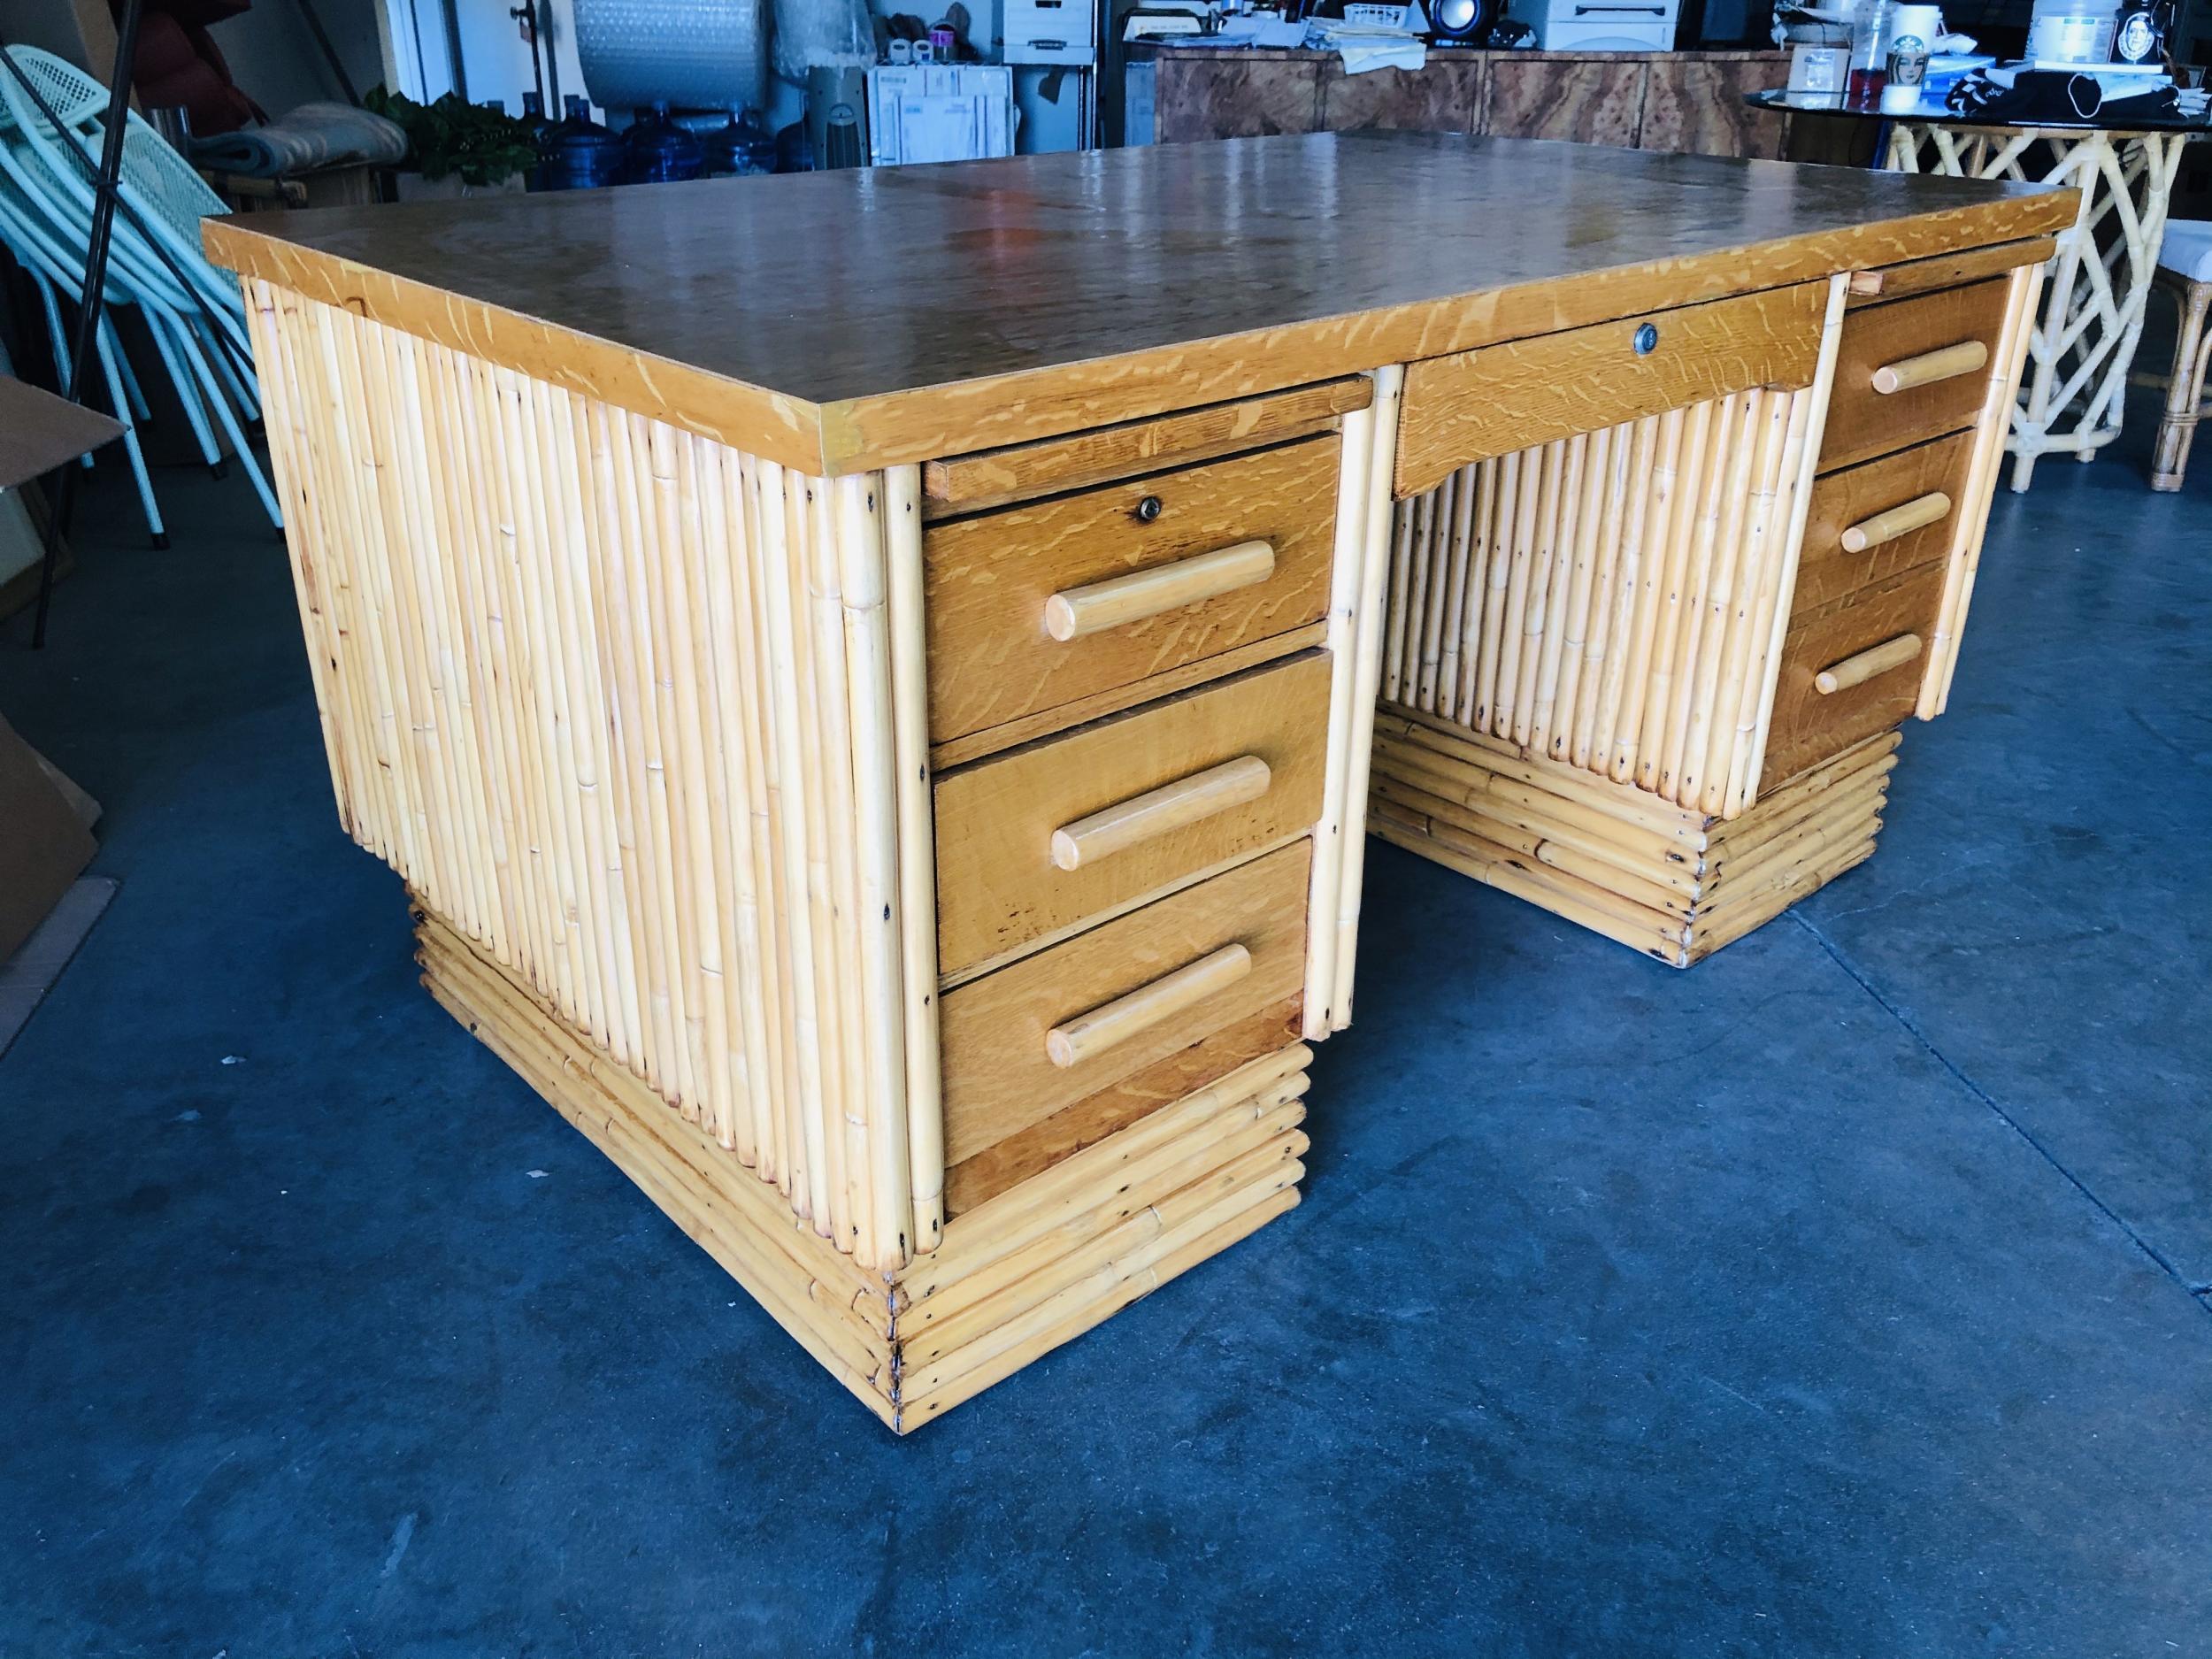 Restored very large stacked rattan desk, with Filipino mahogany top. Drawer fronts, side panels, and top. The desk features a center drawer and six side drawers. Beautiful stacked rattan legs race from the top to the bottom, creating a great modern